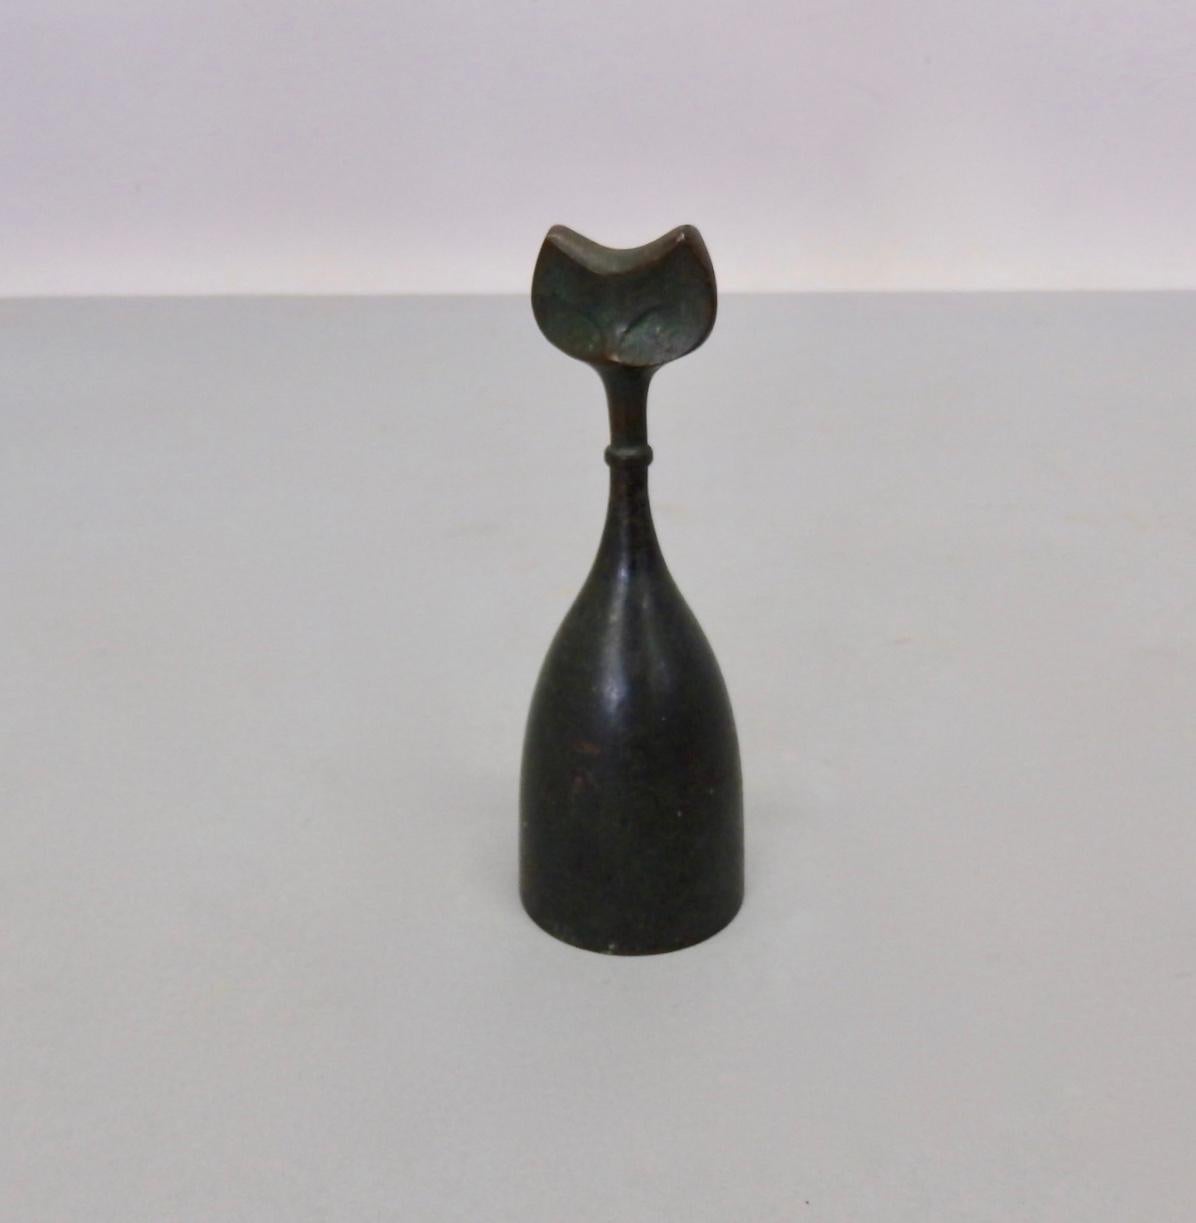 Nicely patinated bell with handle shaped after a feline head.